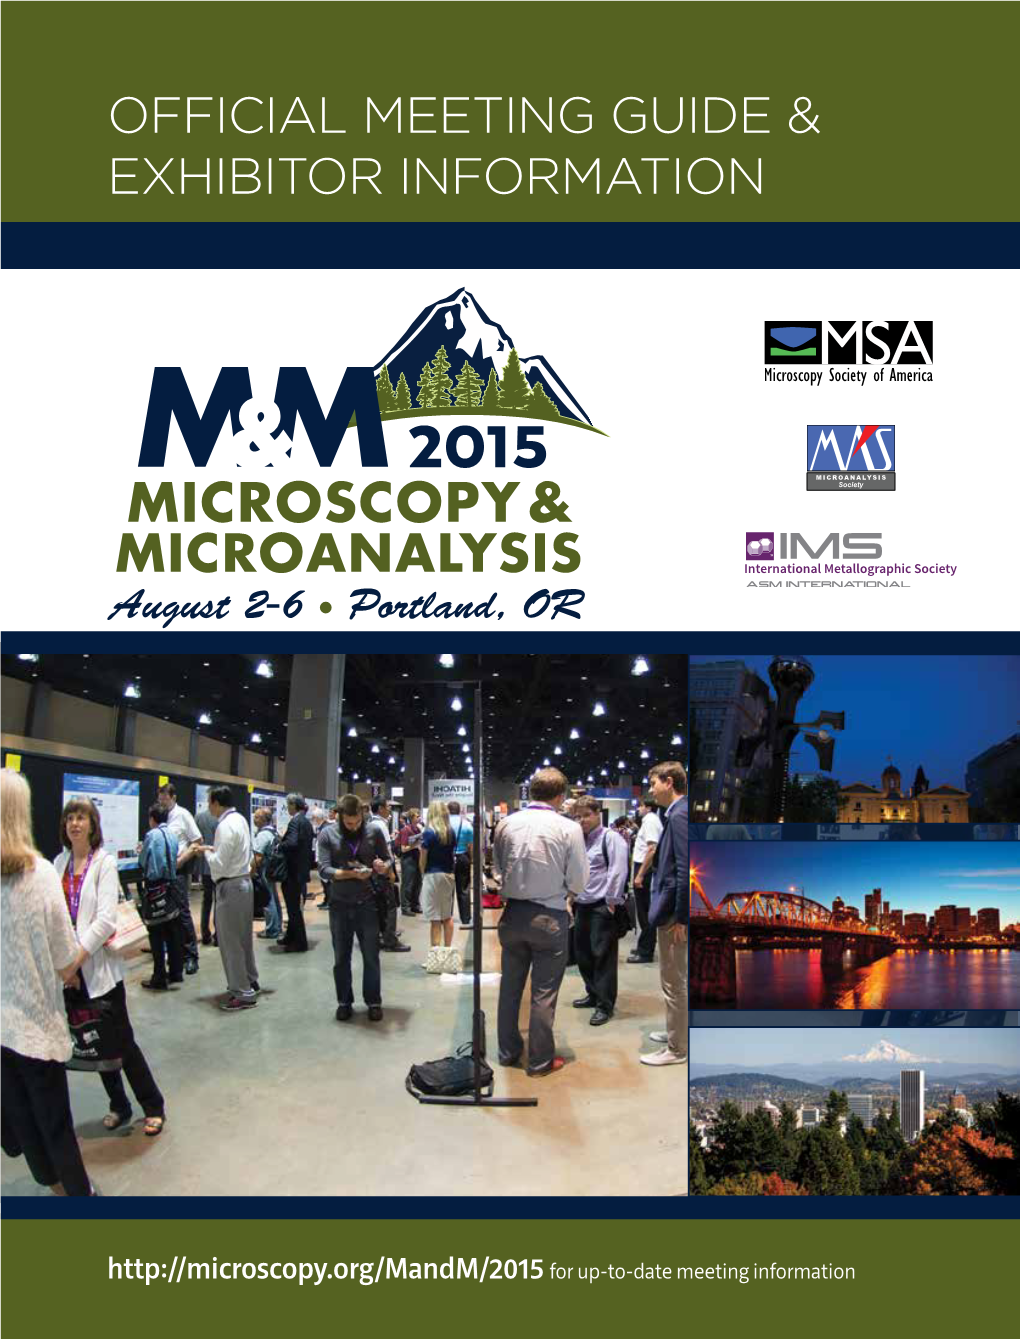 Meeting Guide & Exhibitor Information